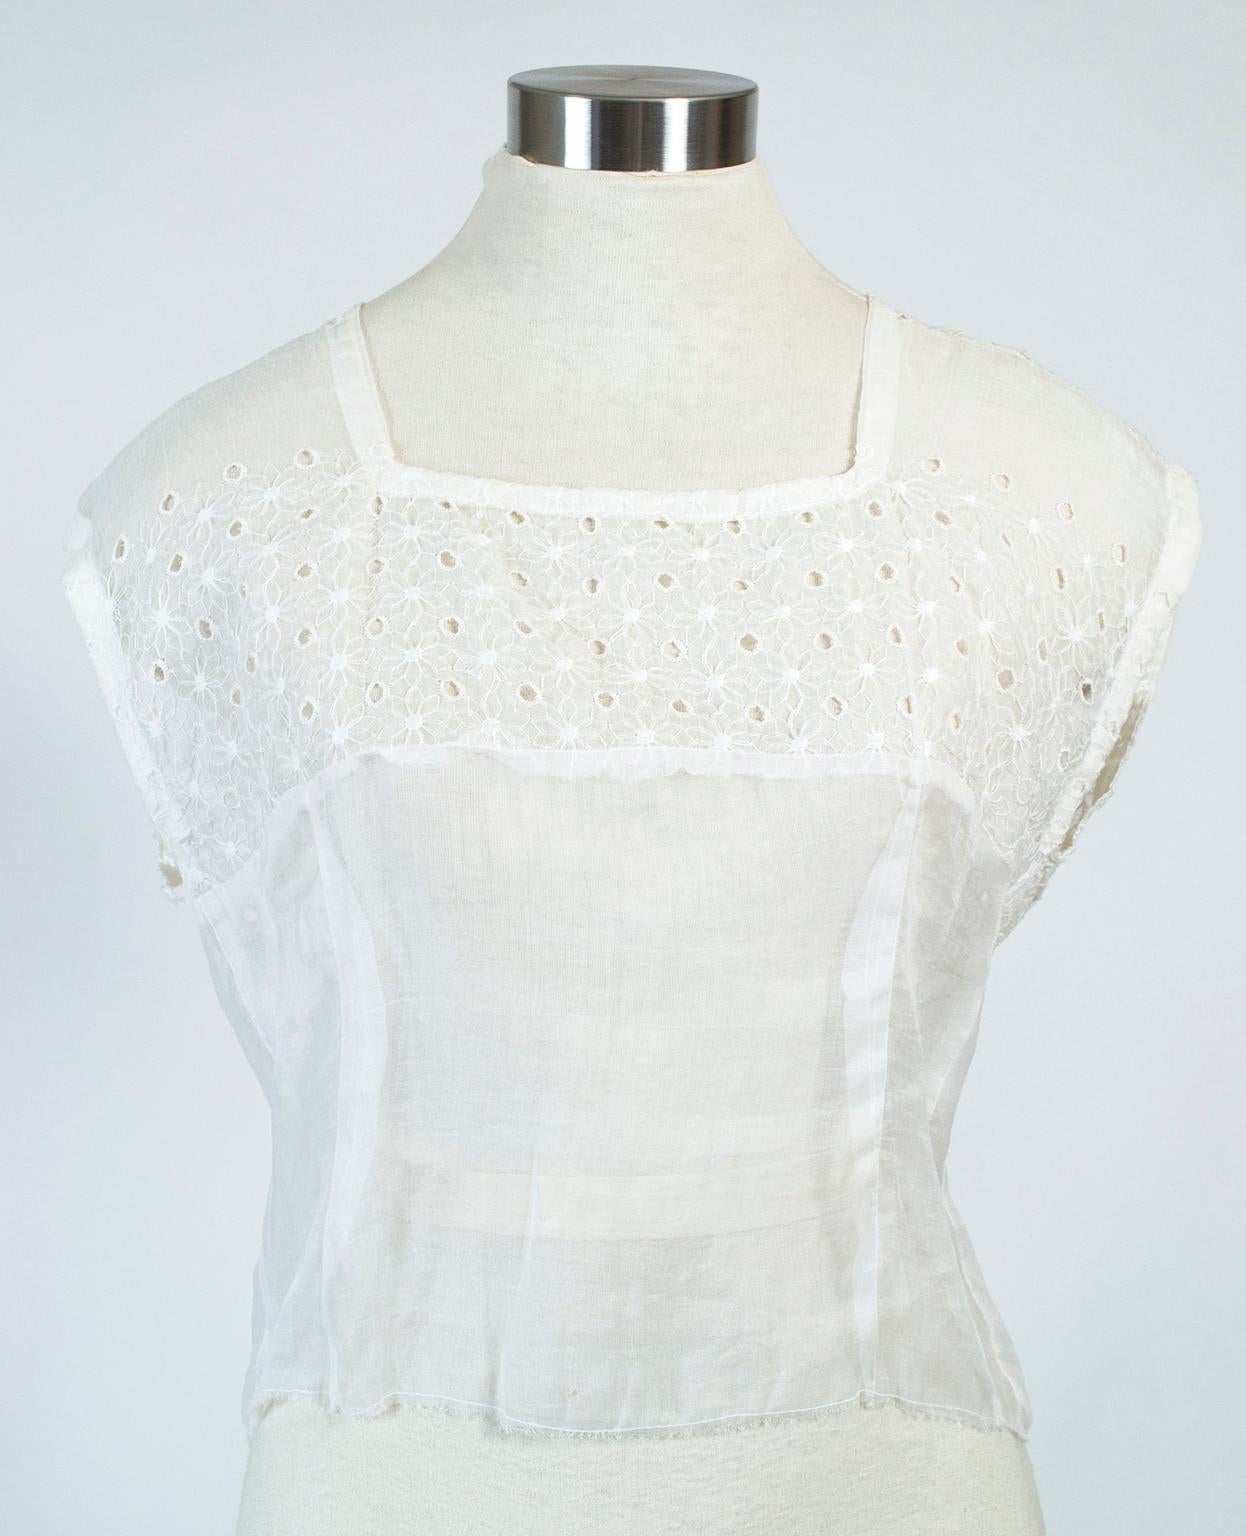 Edwardian Sheer White Organdy Eyelet Cap Sleeve Blouse w Square Neck  – S, 1910s In Good Condition For Sale In Tucson, AZ